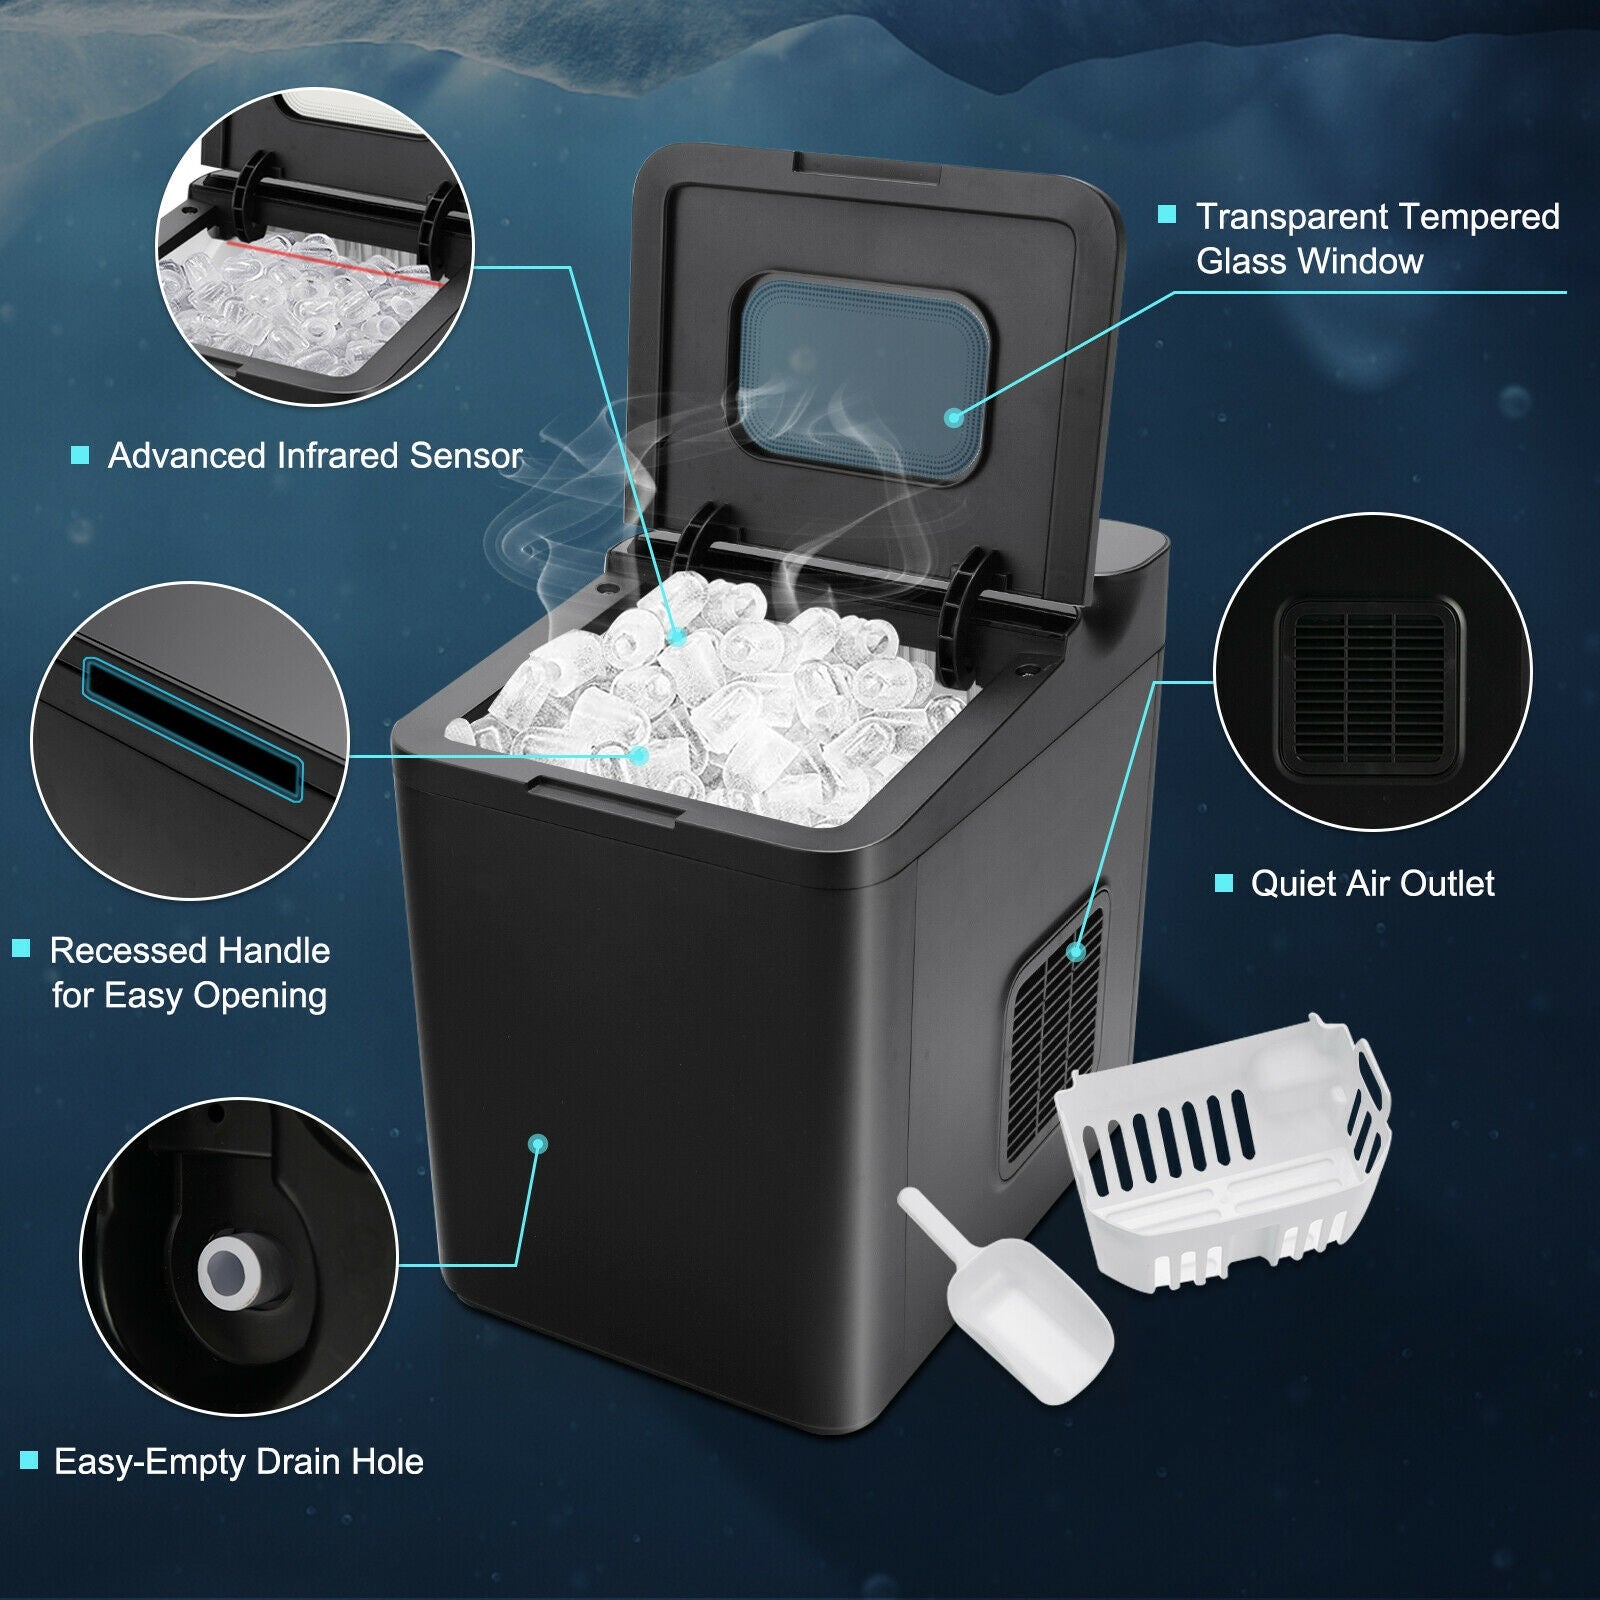 Smart & Efficient Usage with Infrared Sensor: Equipped with advanced infrared sensors, this ice maker detects when the ice bin is full and stops production to prevent overflows. It also pauses and alerts you when the water tank needs refilling, ensuring energy-saving and safe operation. The water tank has a generous capacity of 1.5 liters.